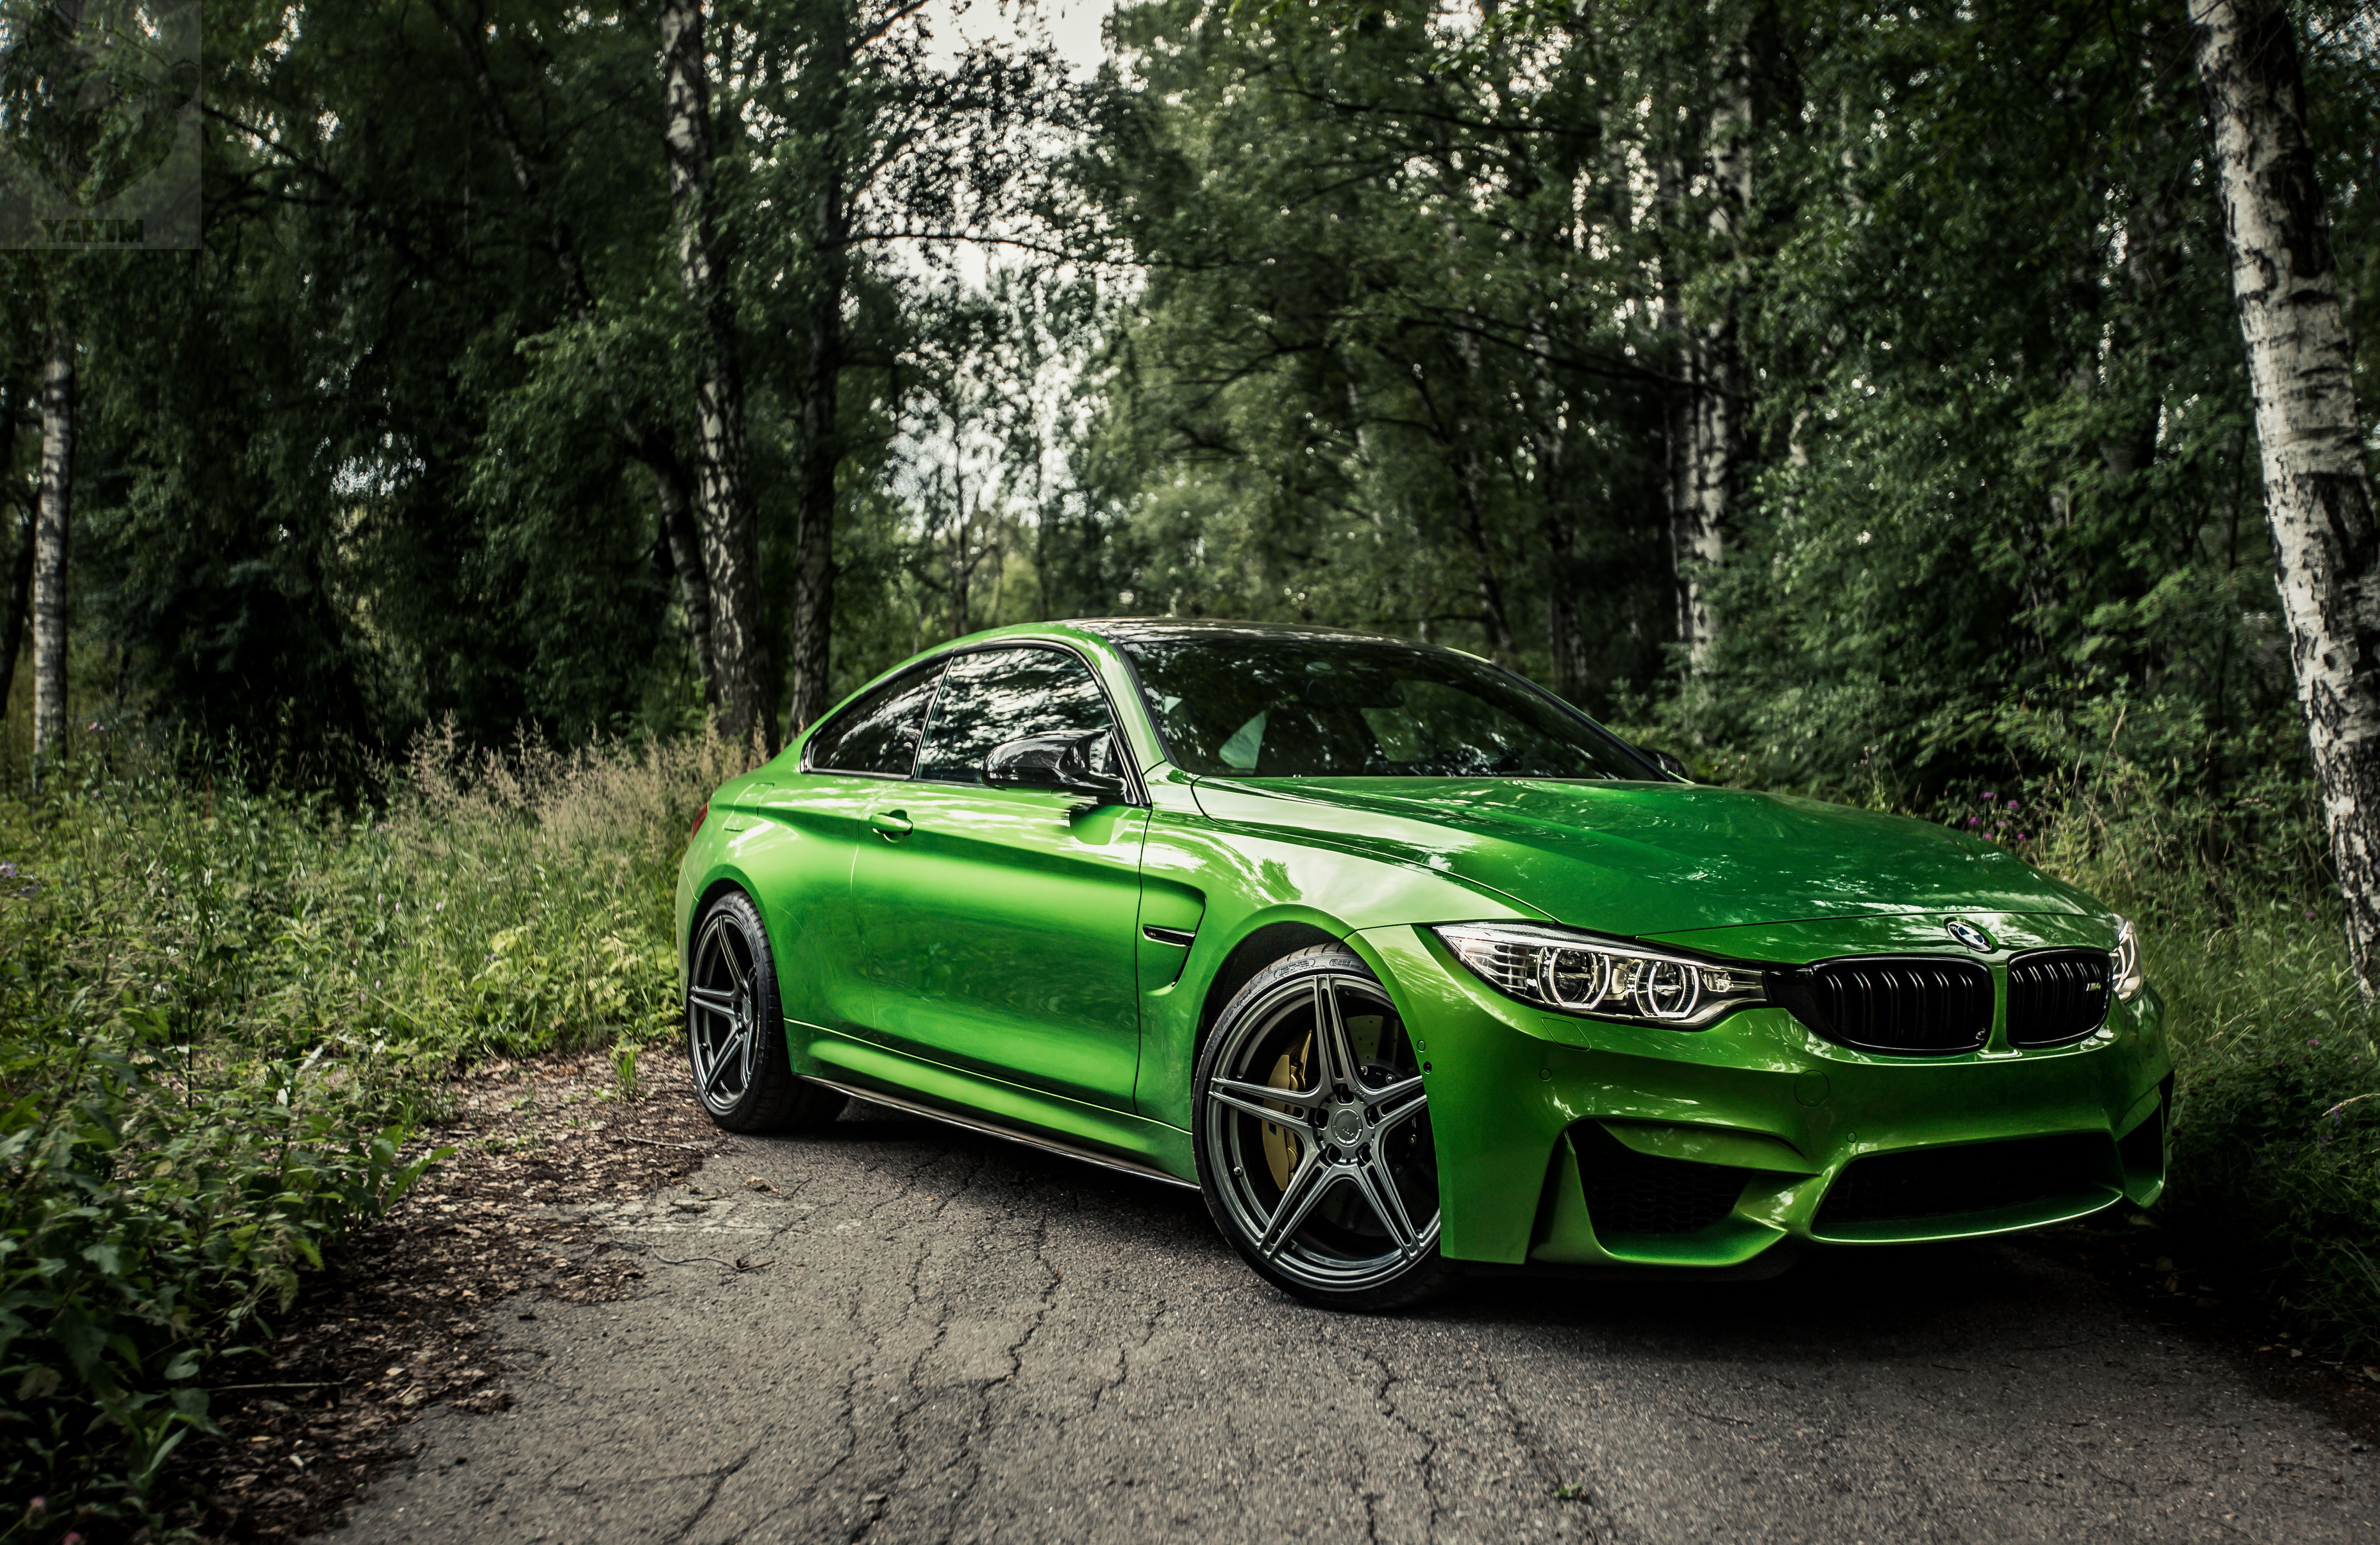  Bmw M4 HQ Background Images